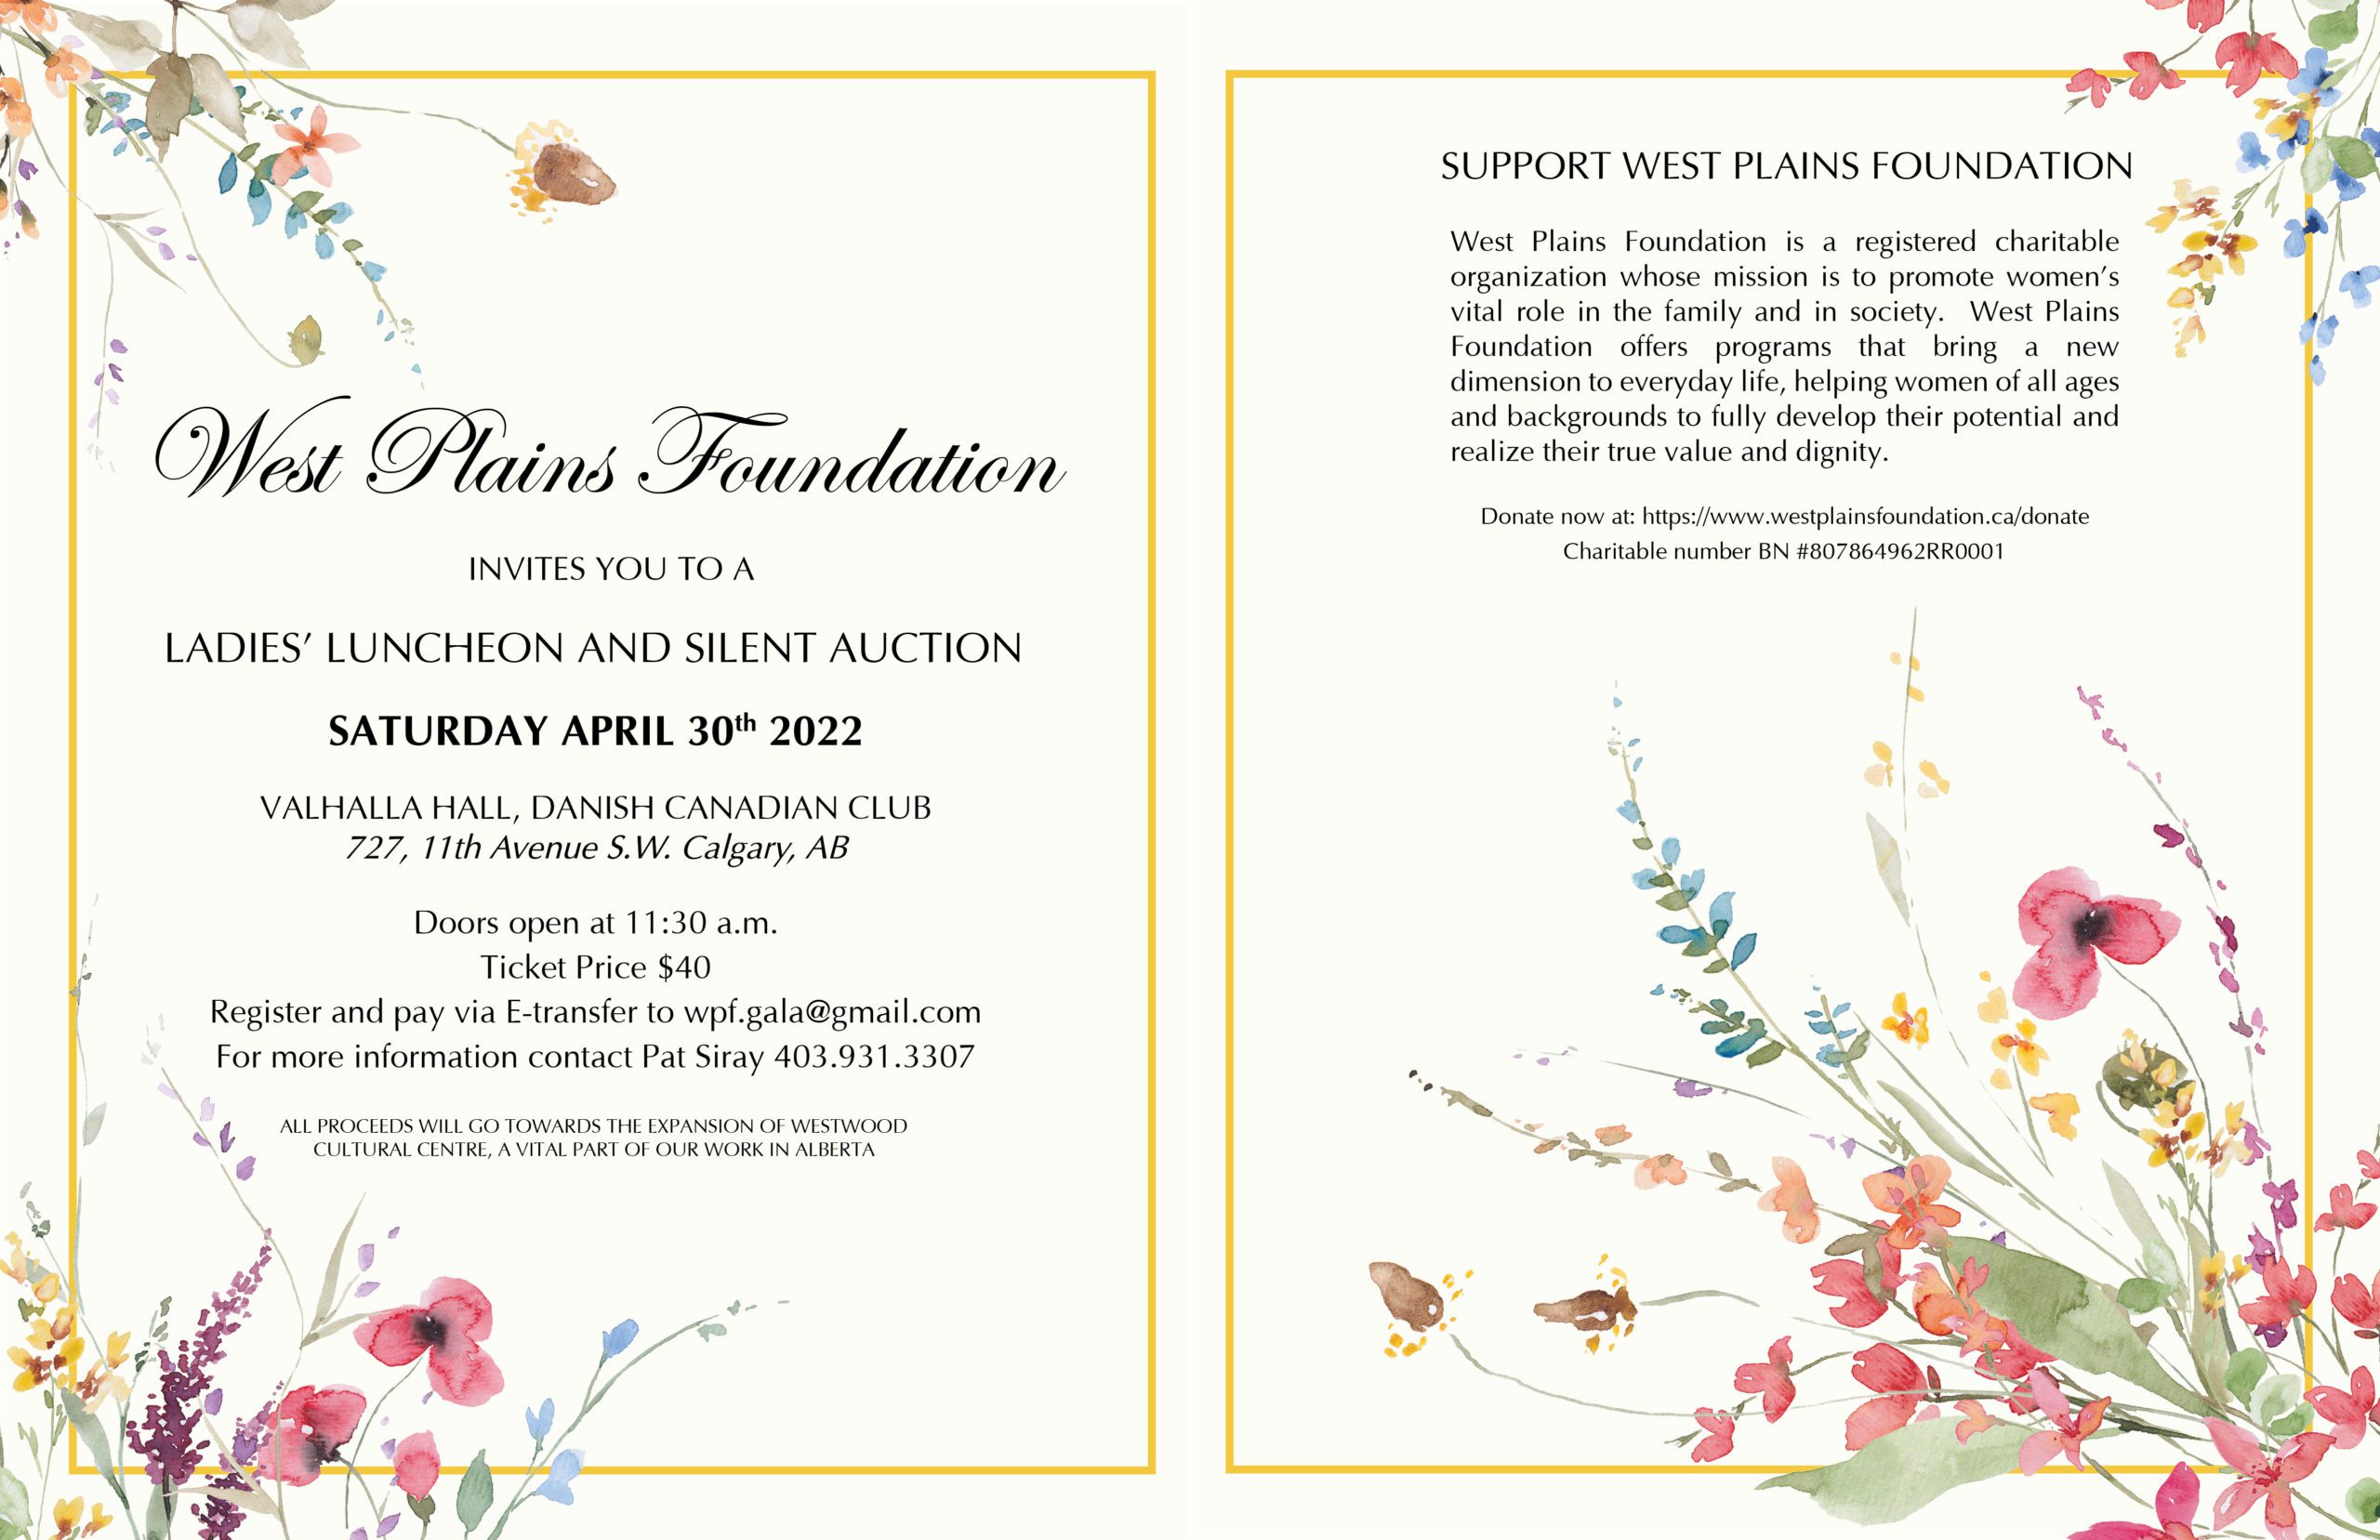 Ladies' Luncheon and Silent Auction 2022 Invitation